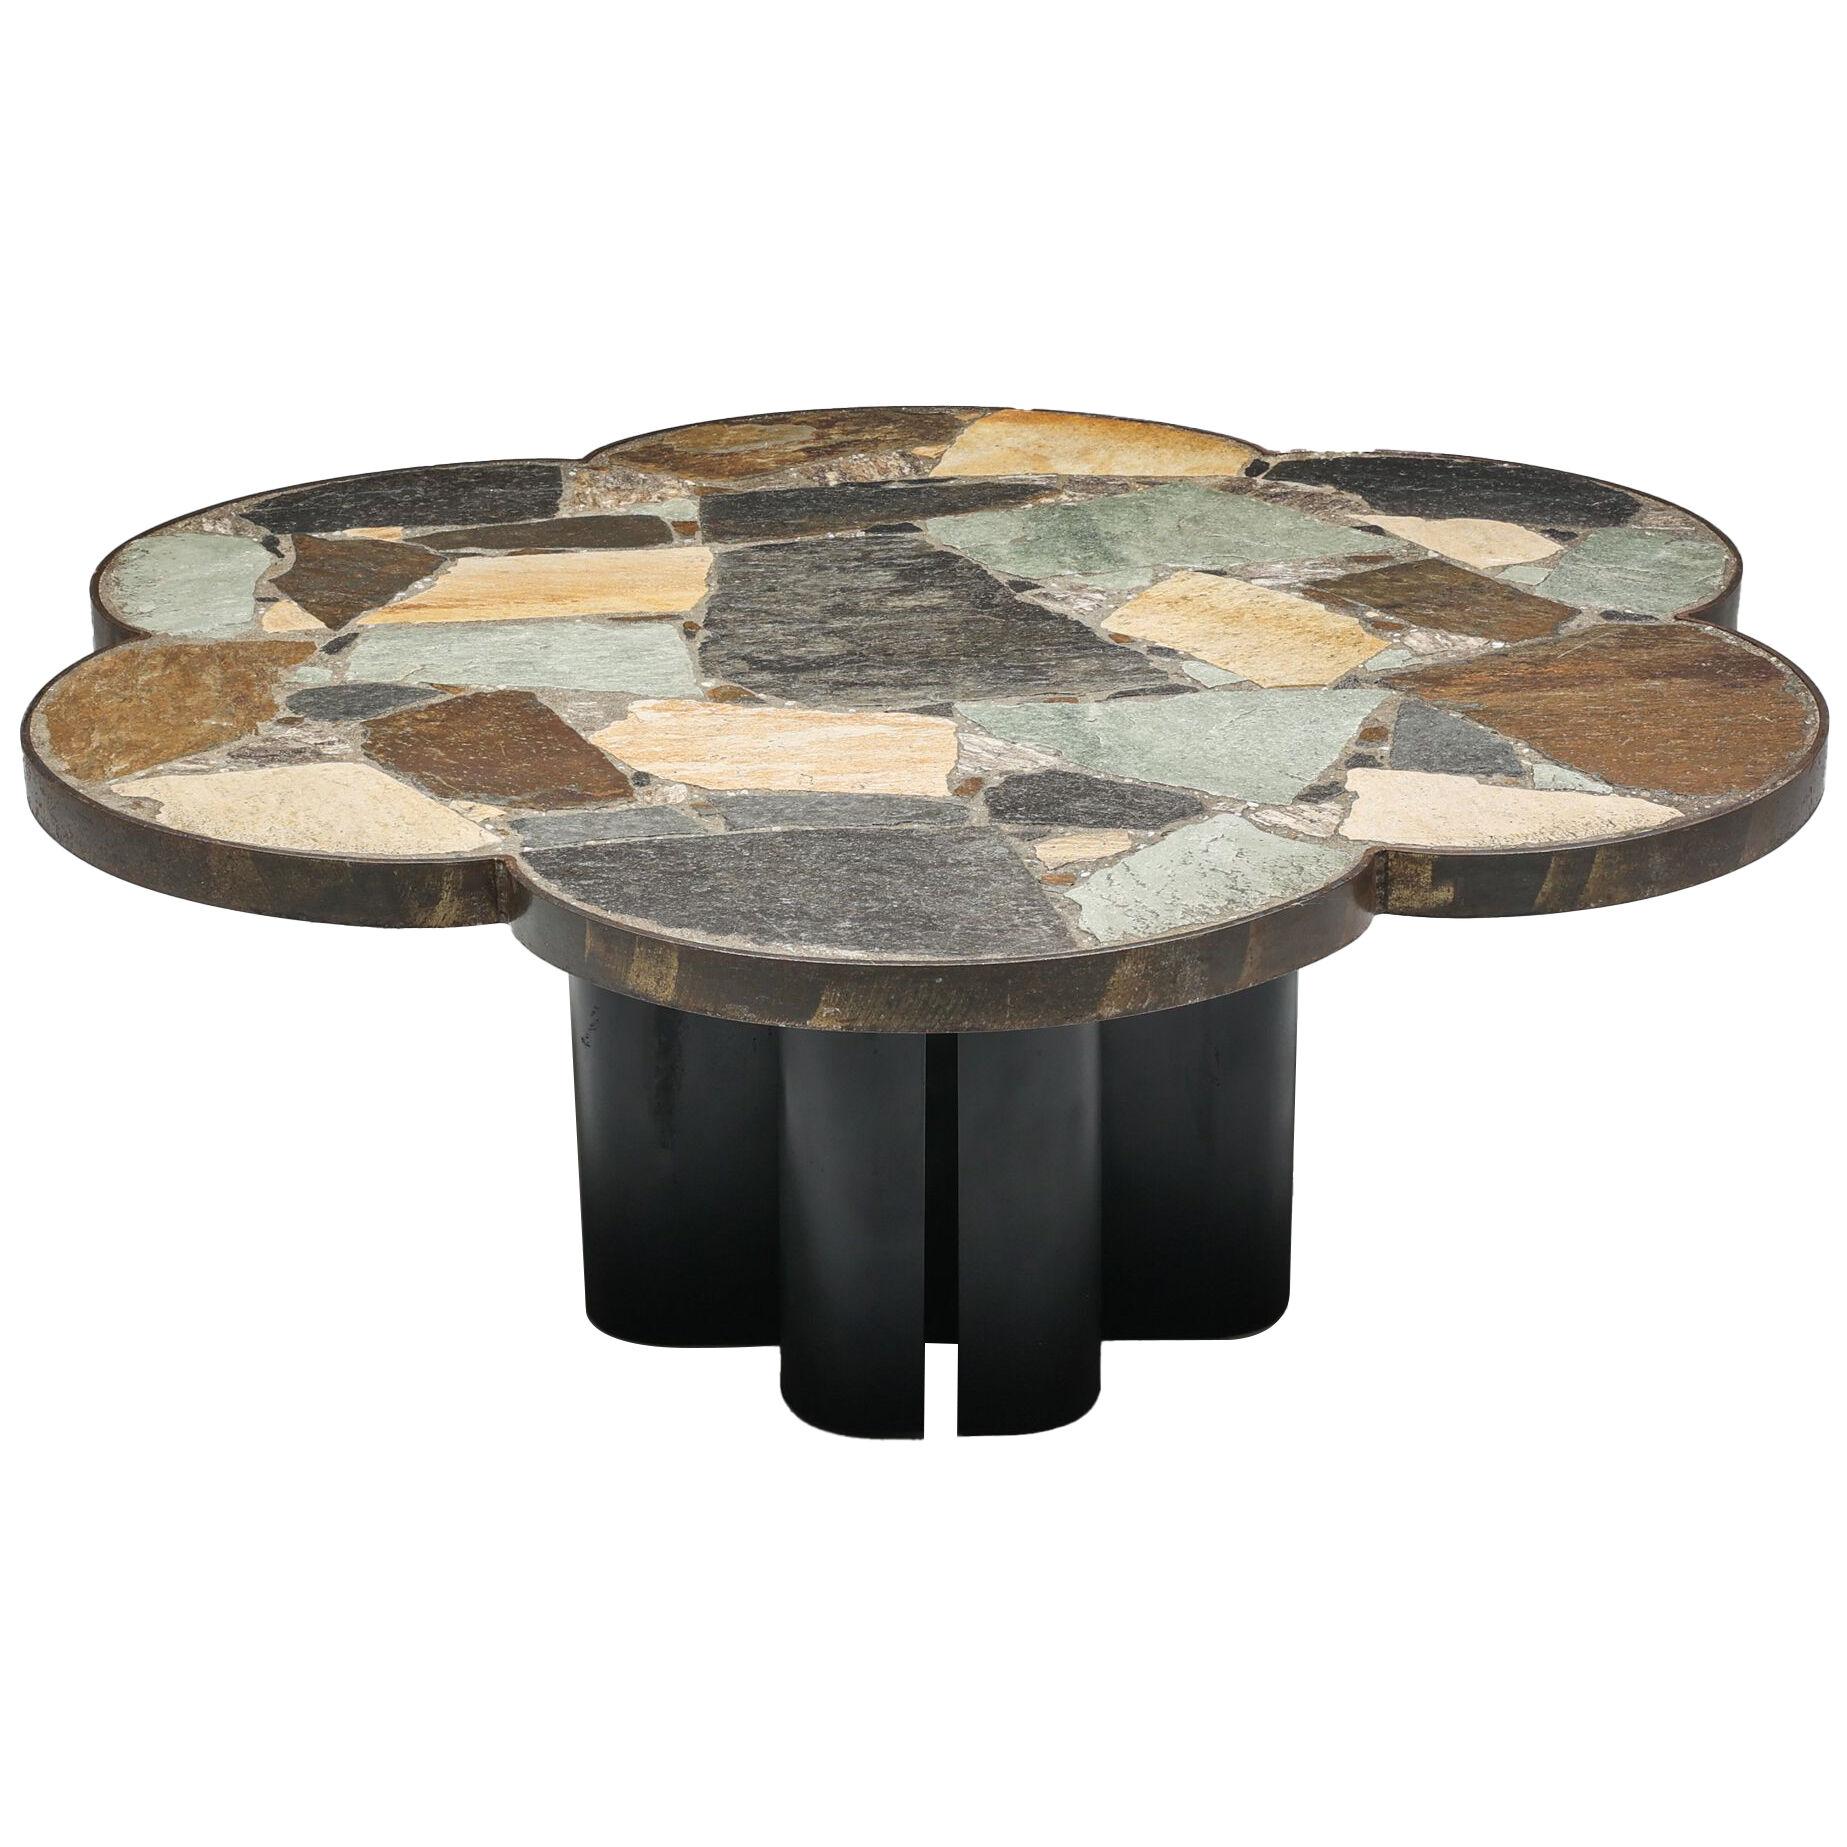 Mosaic Stone Flower Shaped Coffee Table - 1950's